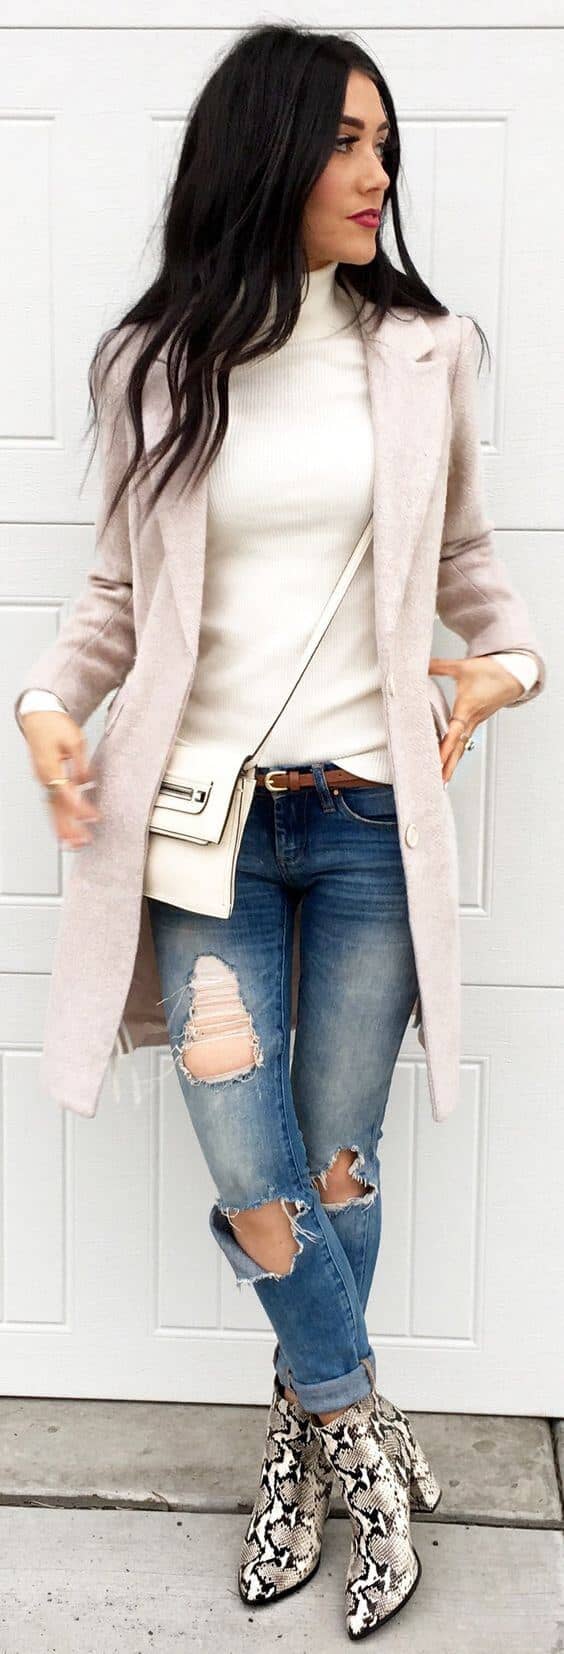 Pristine White Turtleneck Accented by Stone-colored Duster